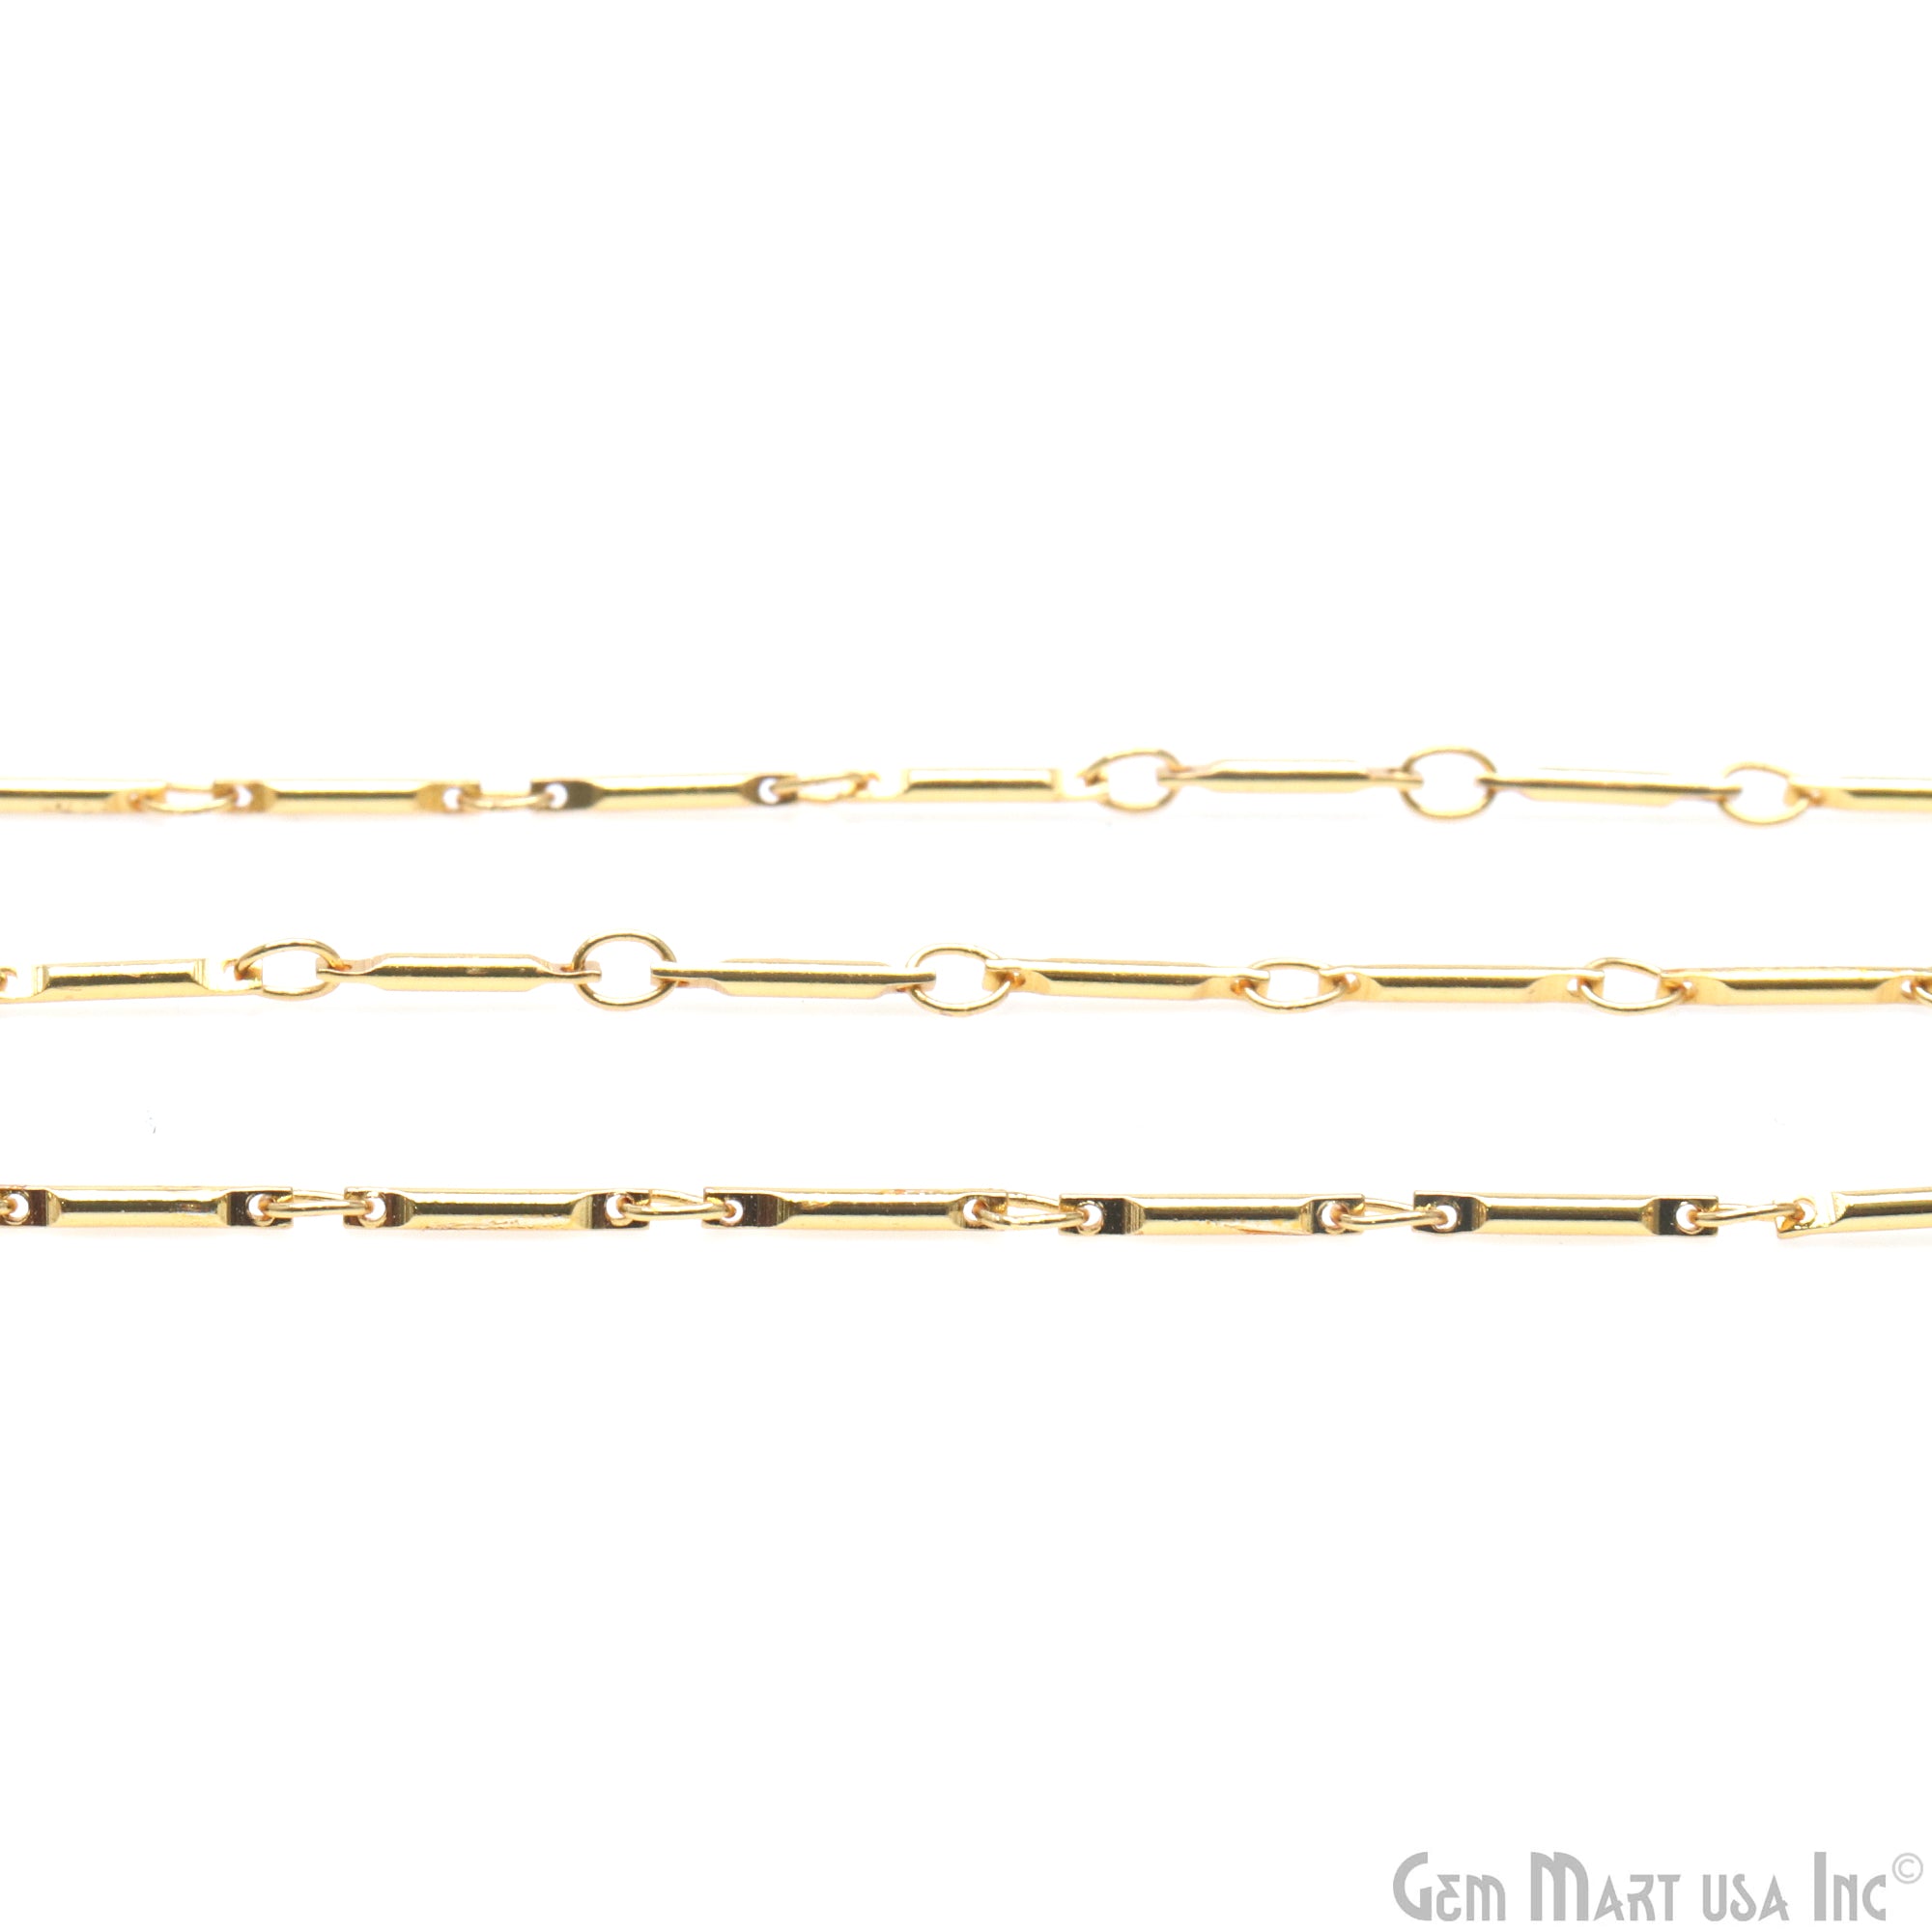 Finding Chain Gold Plated Station Rosary Chain